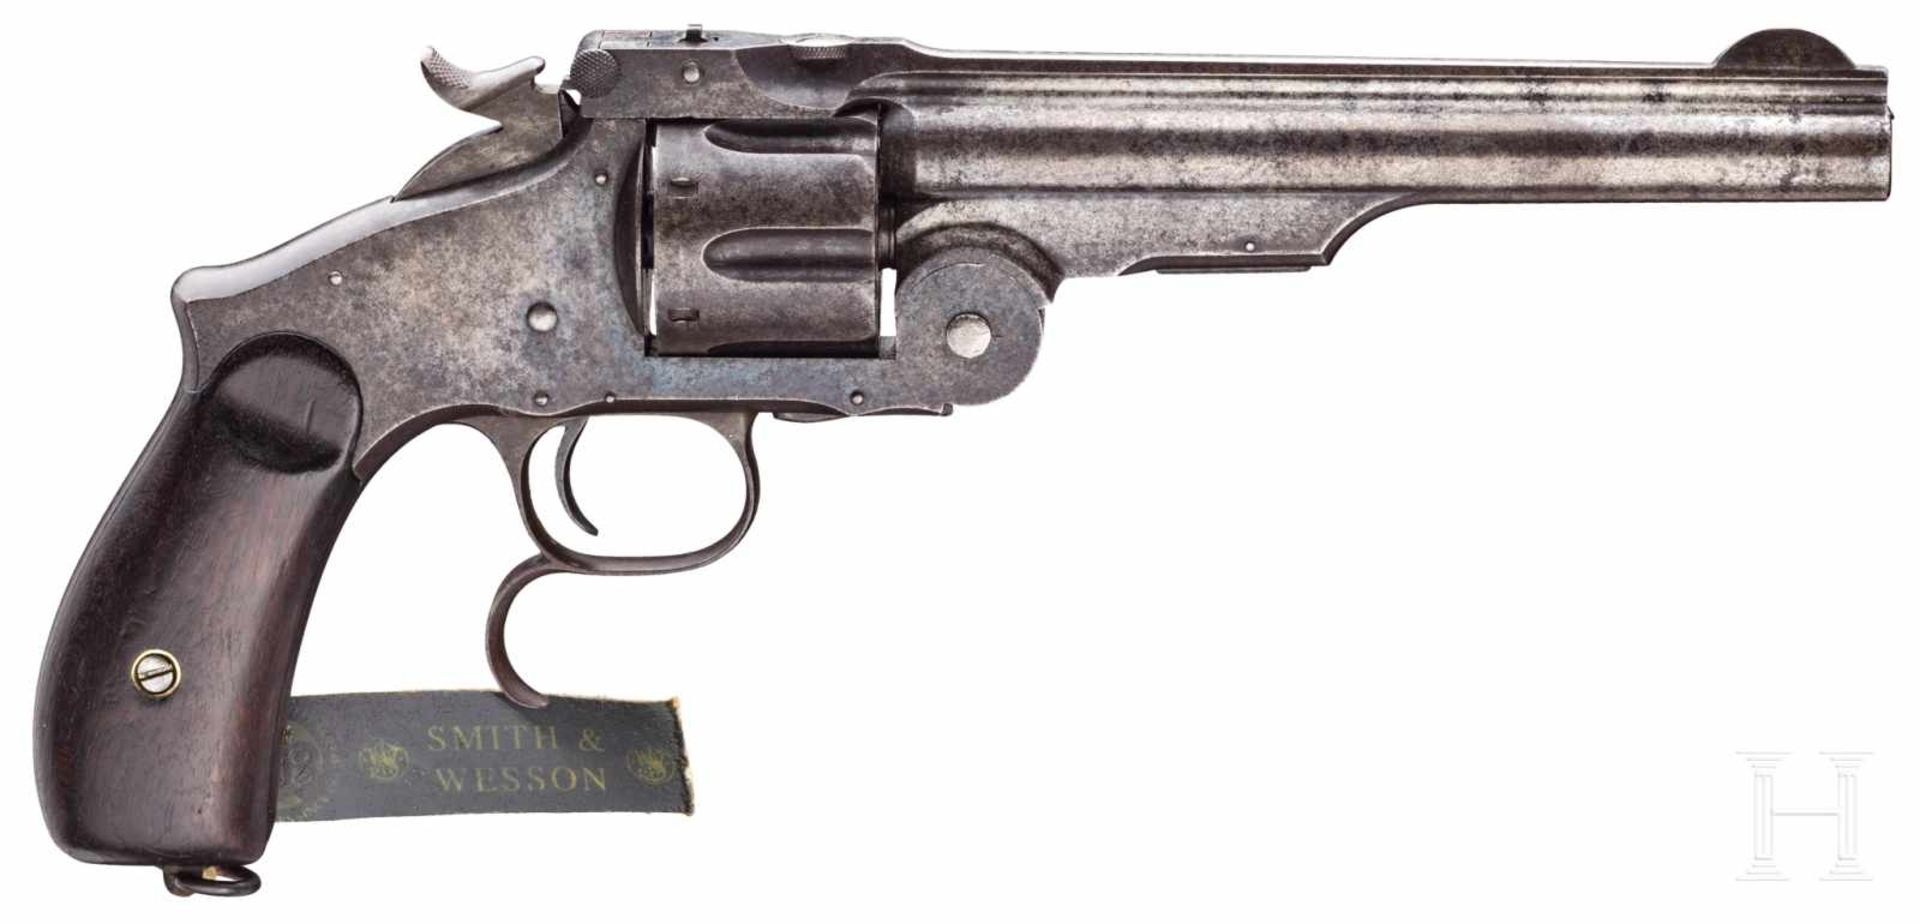 Smith & Wesson New Model No. 3, Ludwig Loewe, BerlinKal. .44 S&W Russian, Nr. 6938, Nummerngleich. - Bild 2 aus 3